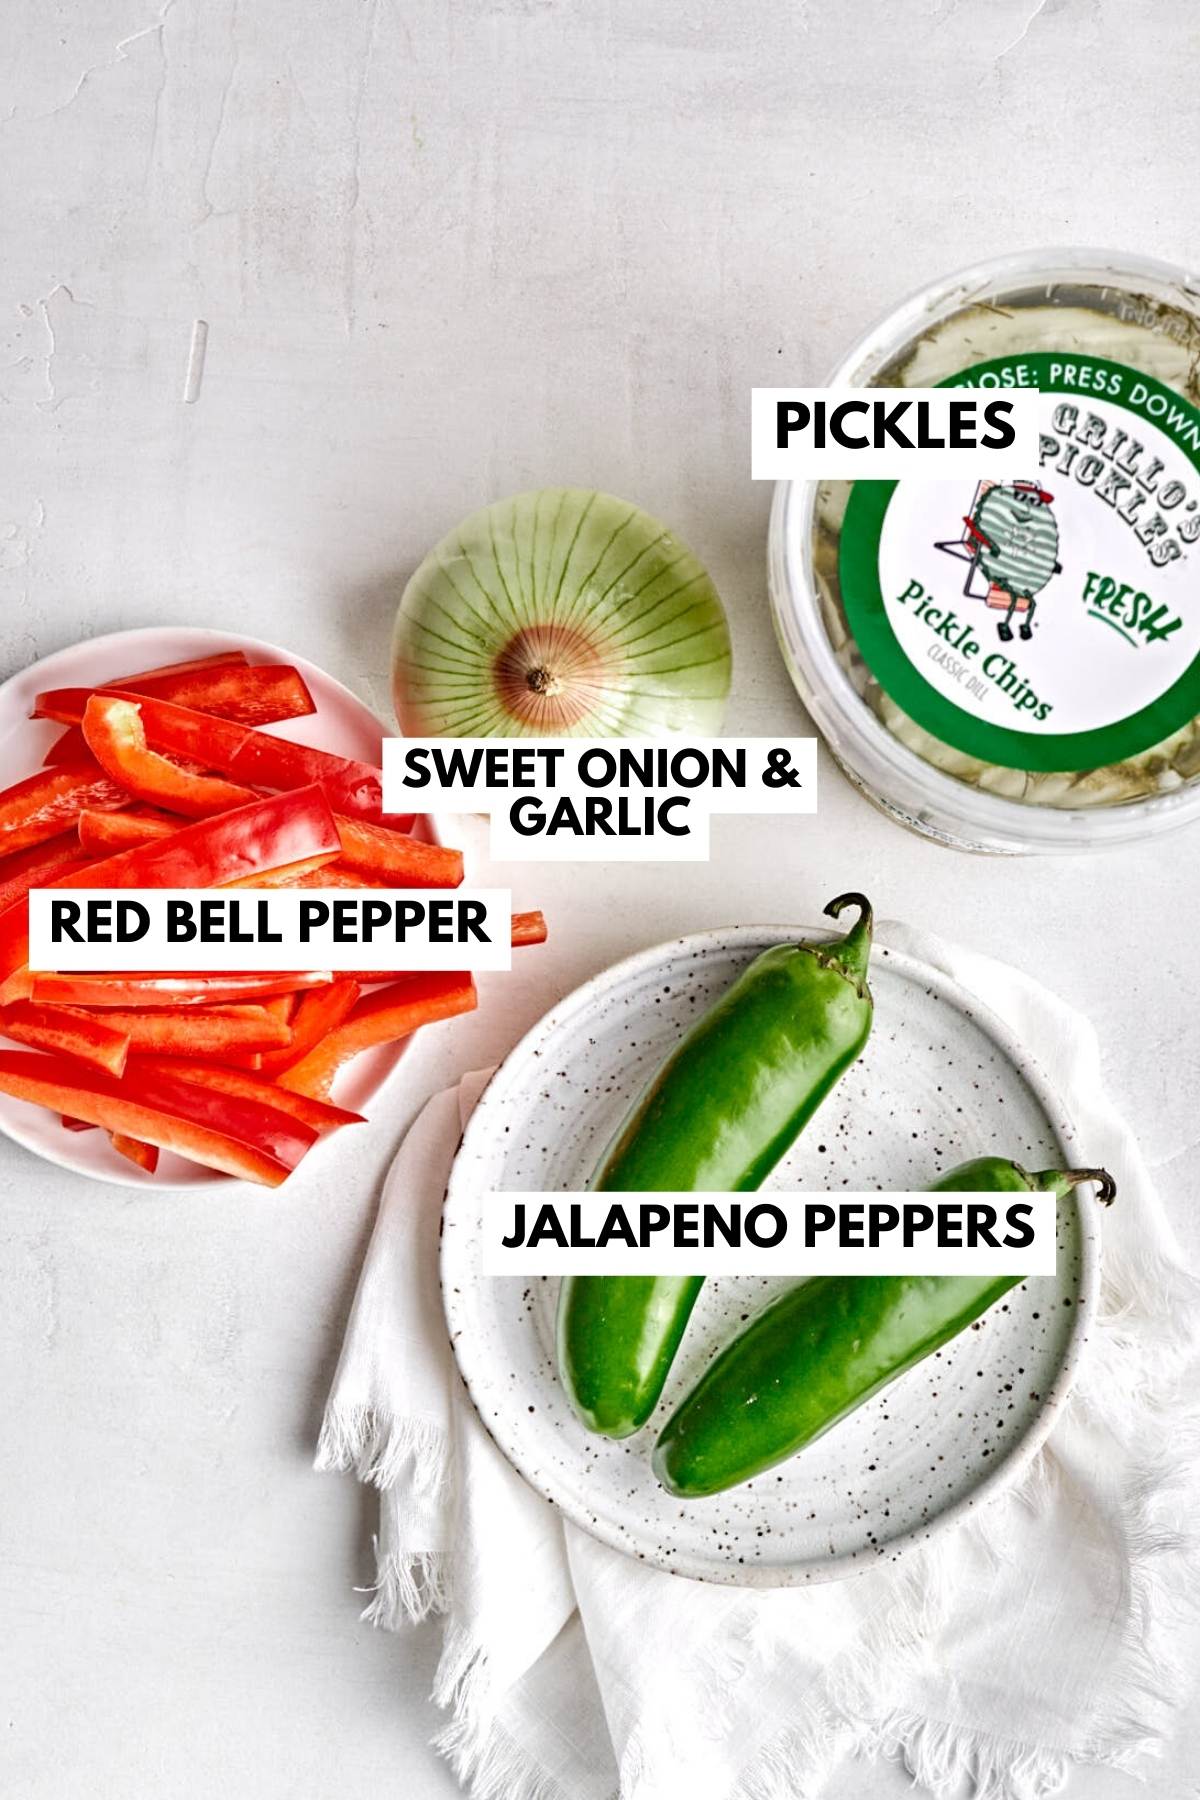 ingredients for the dill pickle de gallo